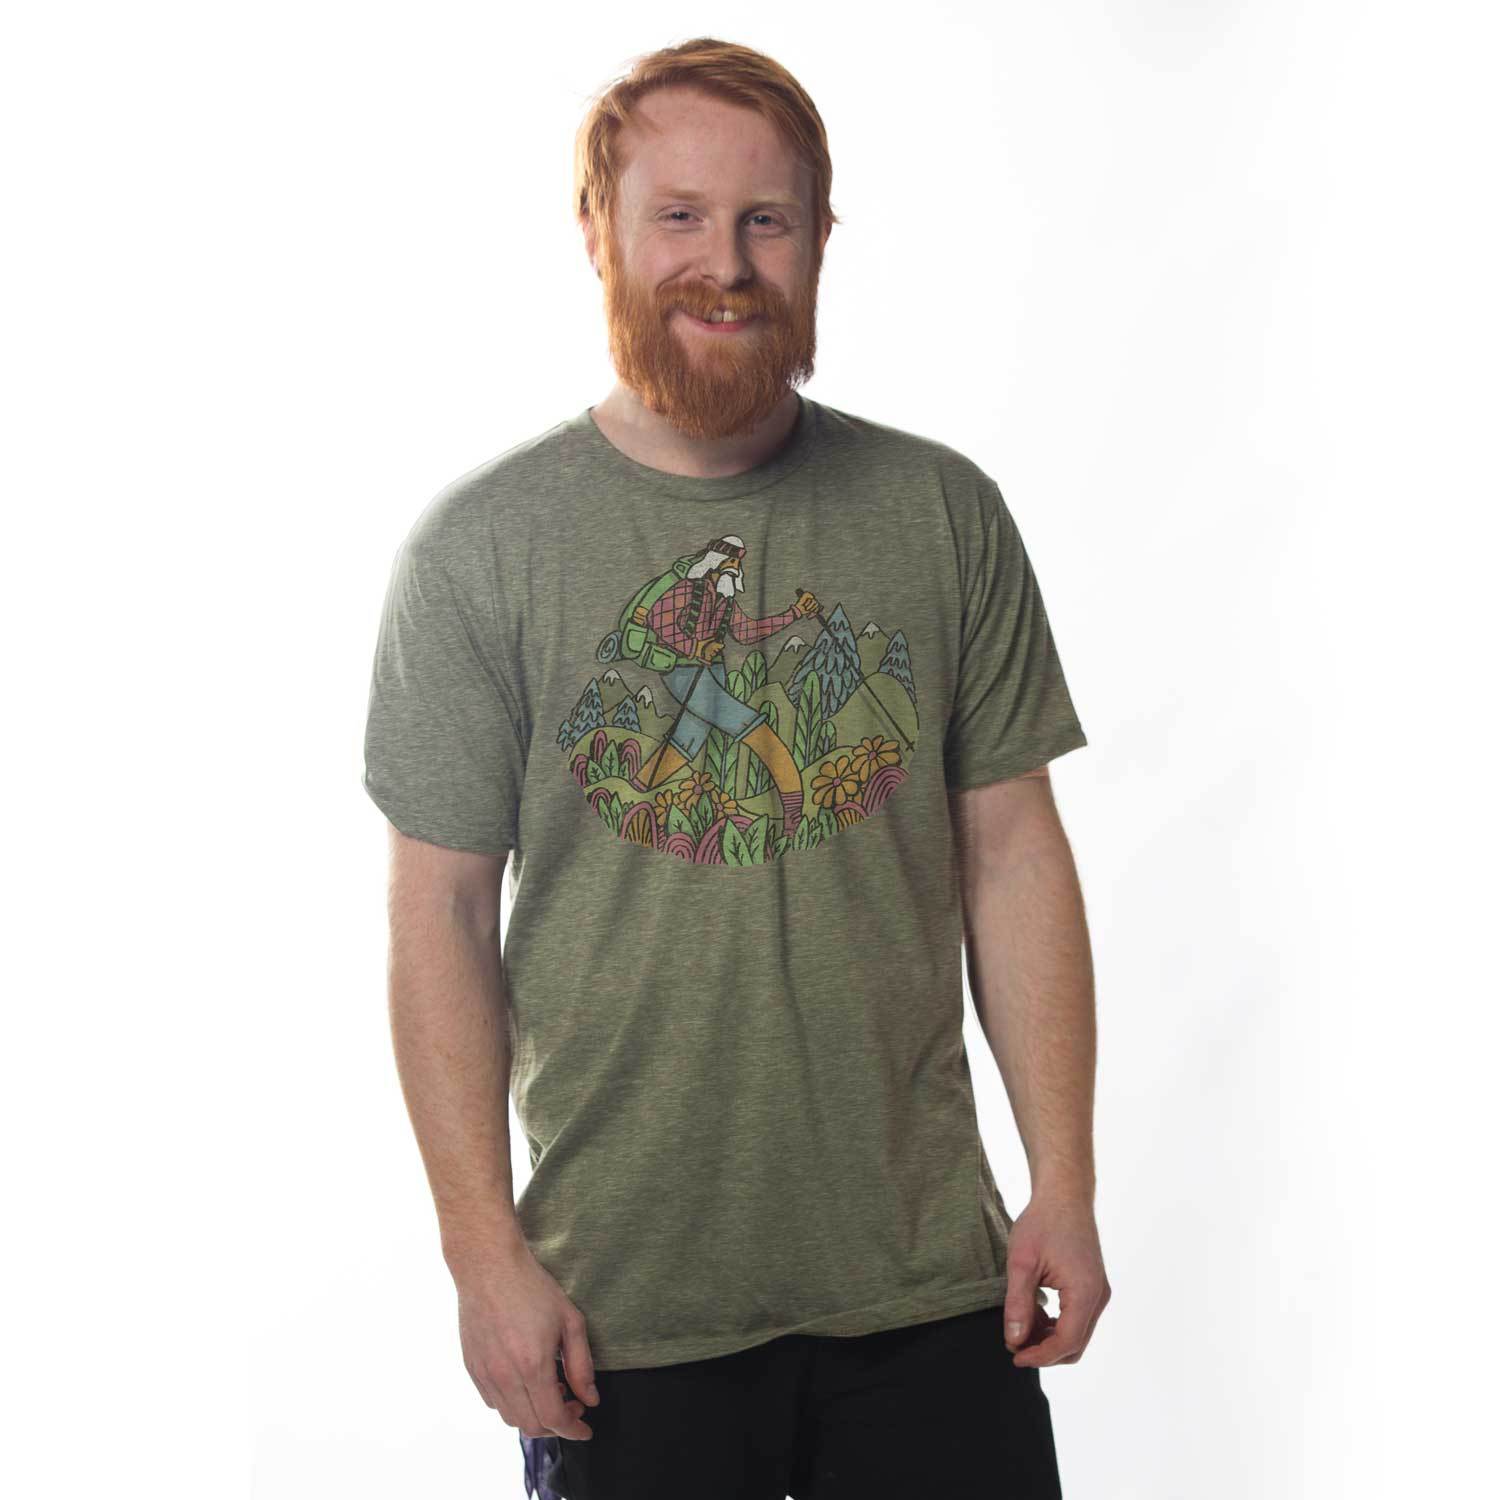 Men's Vintage Mountains Wise Hiker Graphic Tee | Retro Outdoorsy T-shirt on Model | Solid Threads